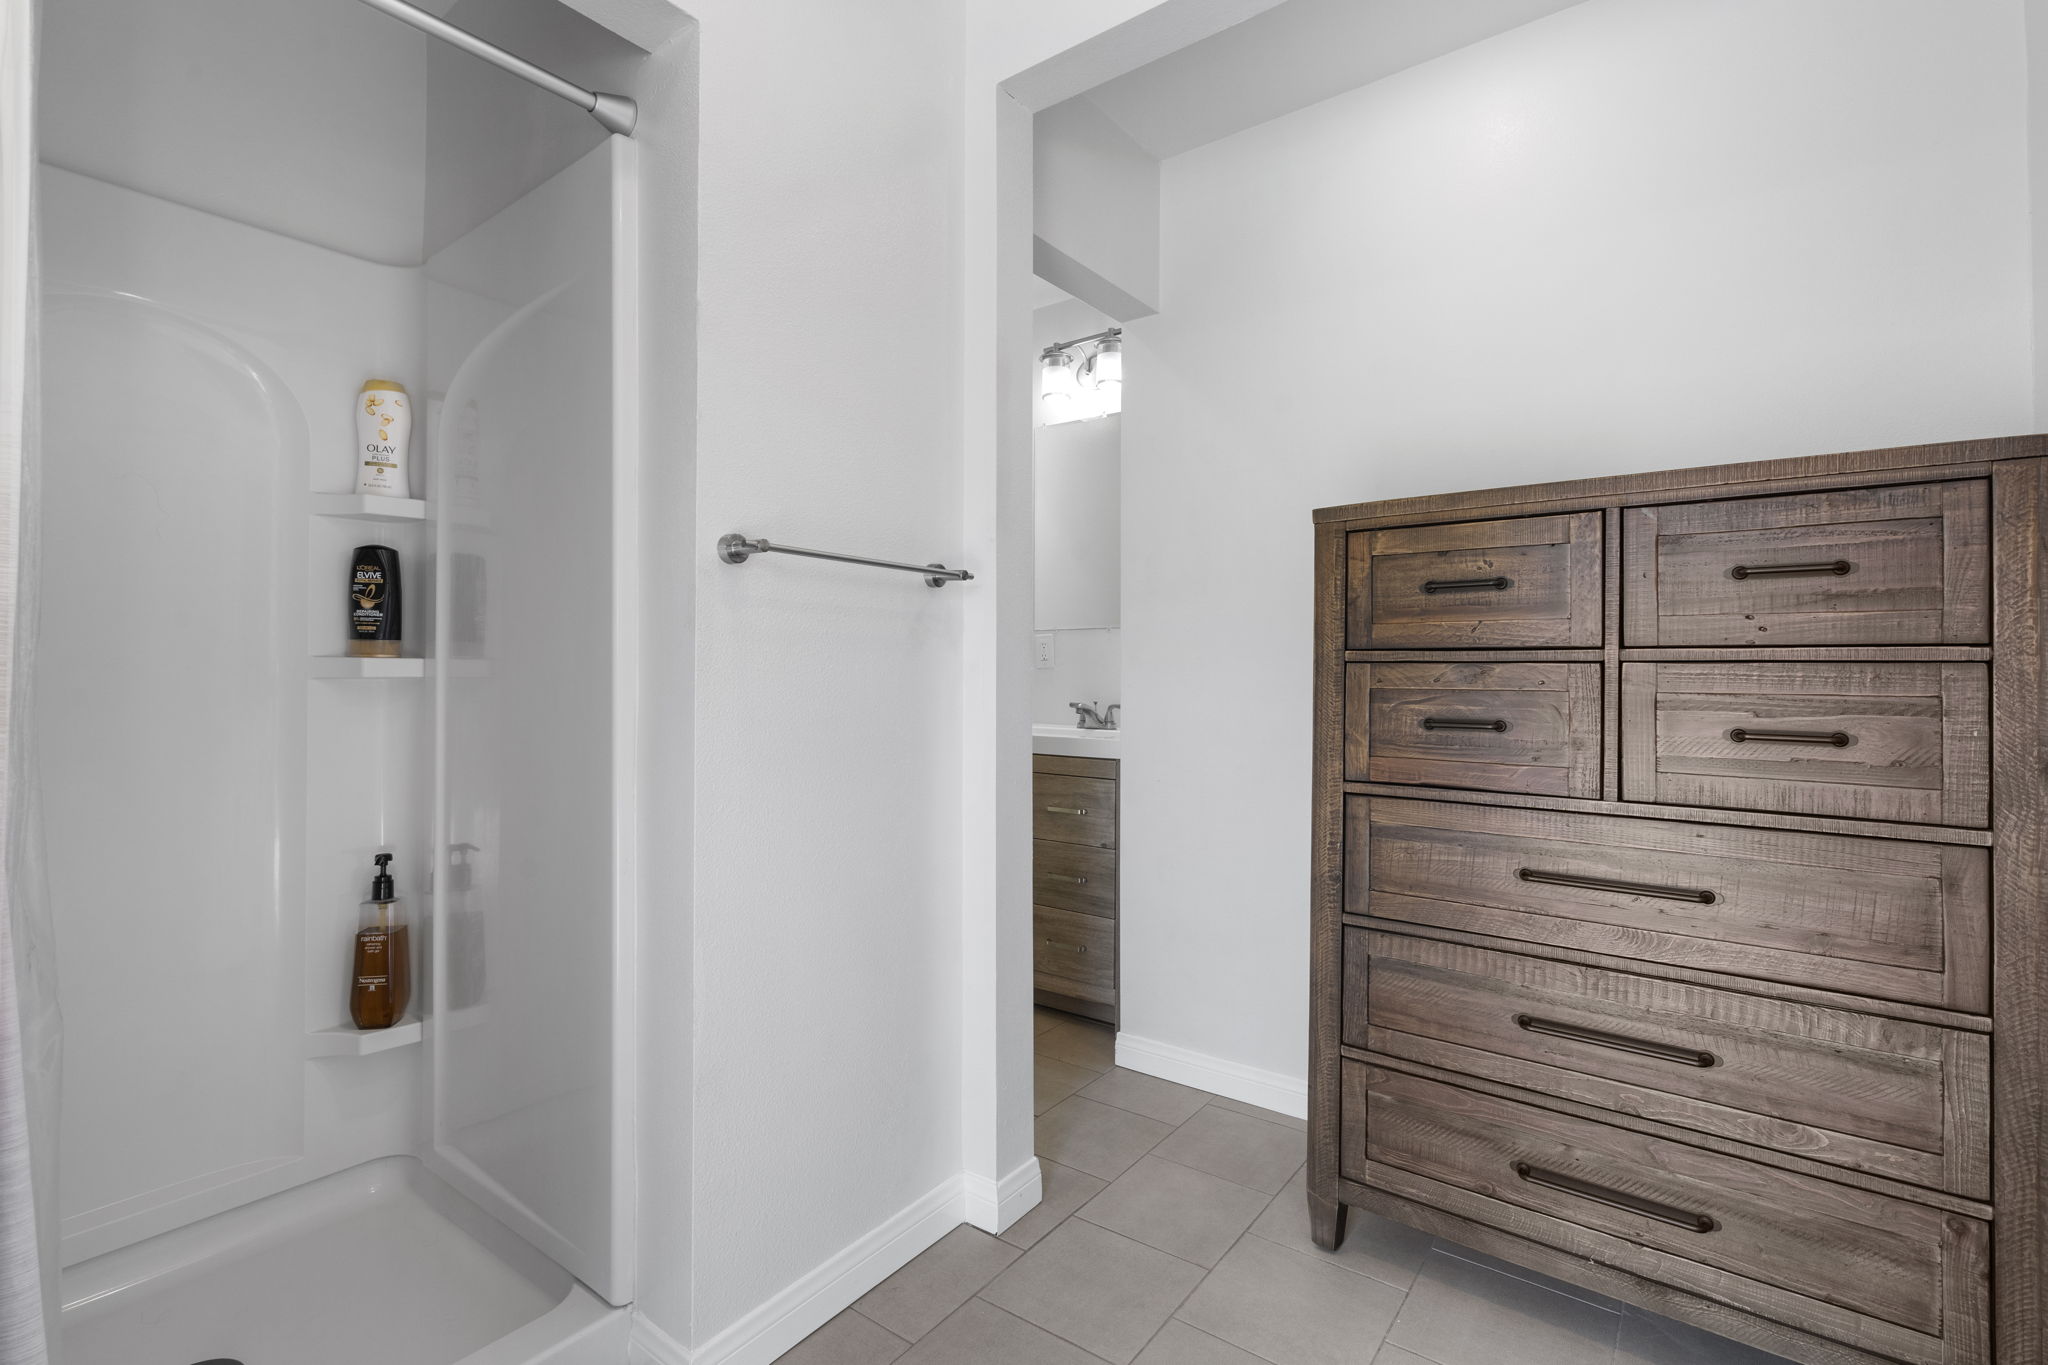 Shower and bathroom with extra storage space